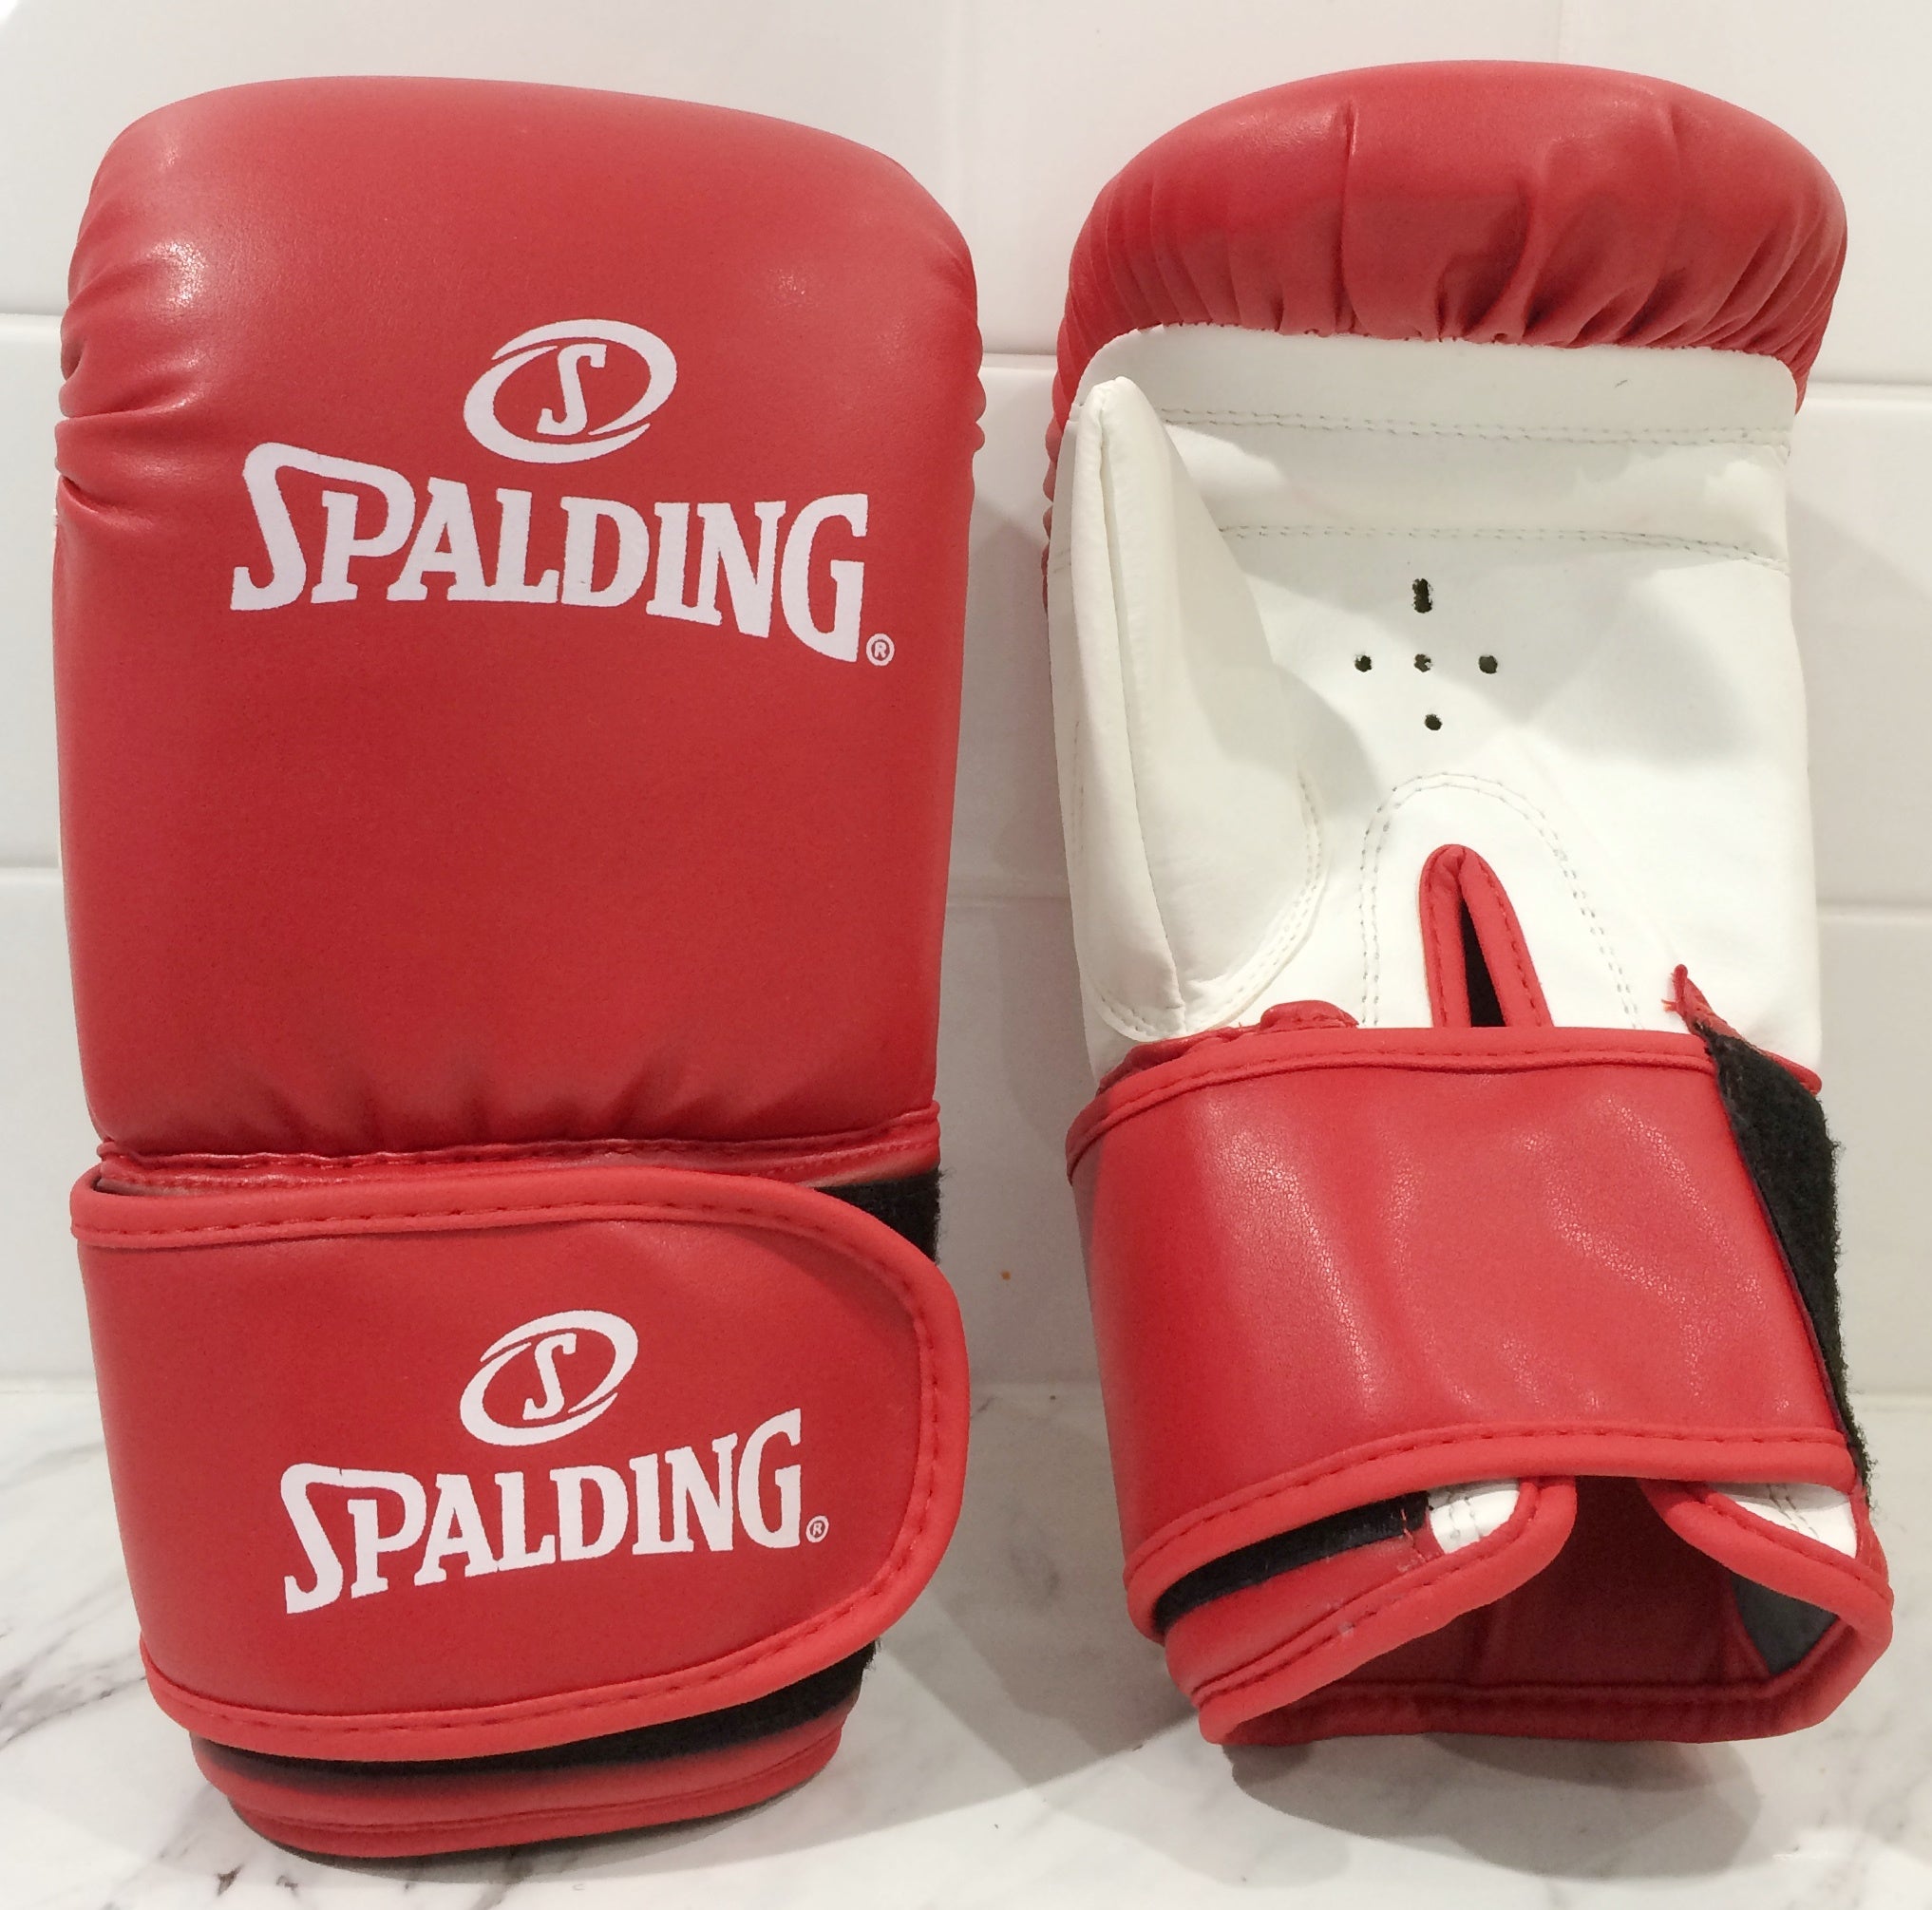 Spalding Boxing Gloves | eXibit collection